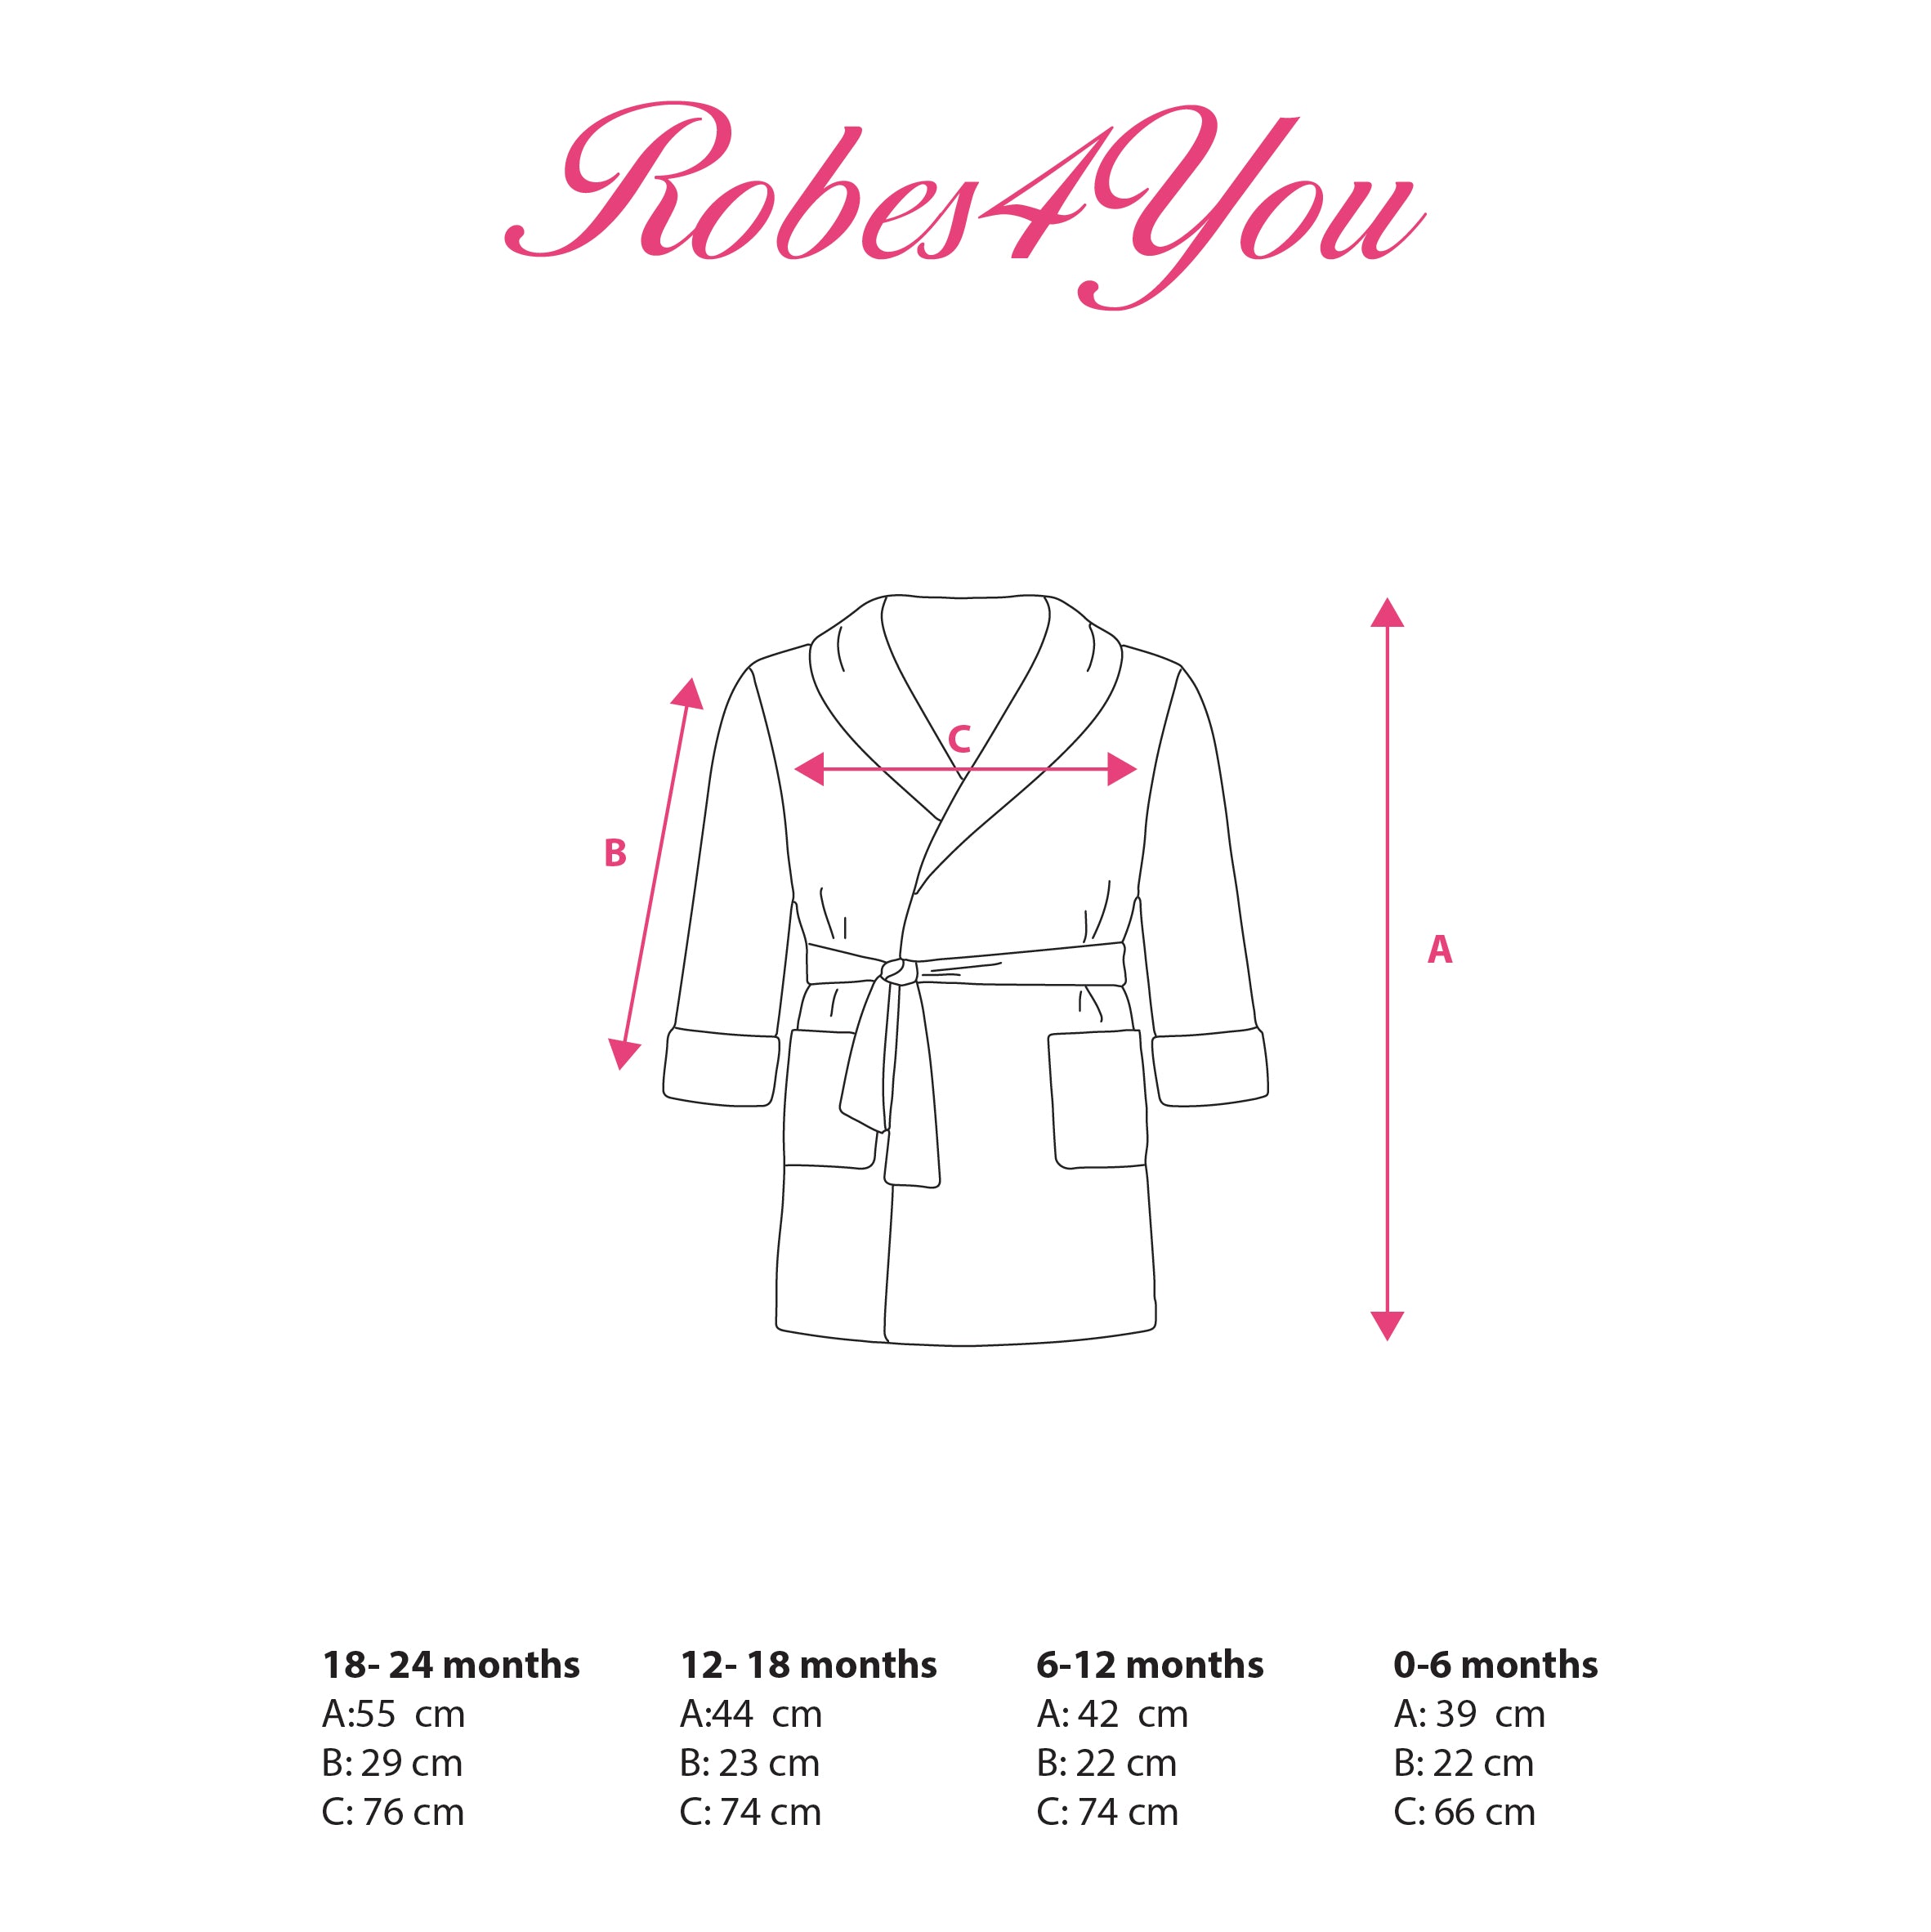 Baby Measurements-Robes4you